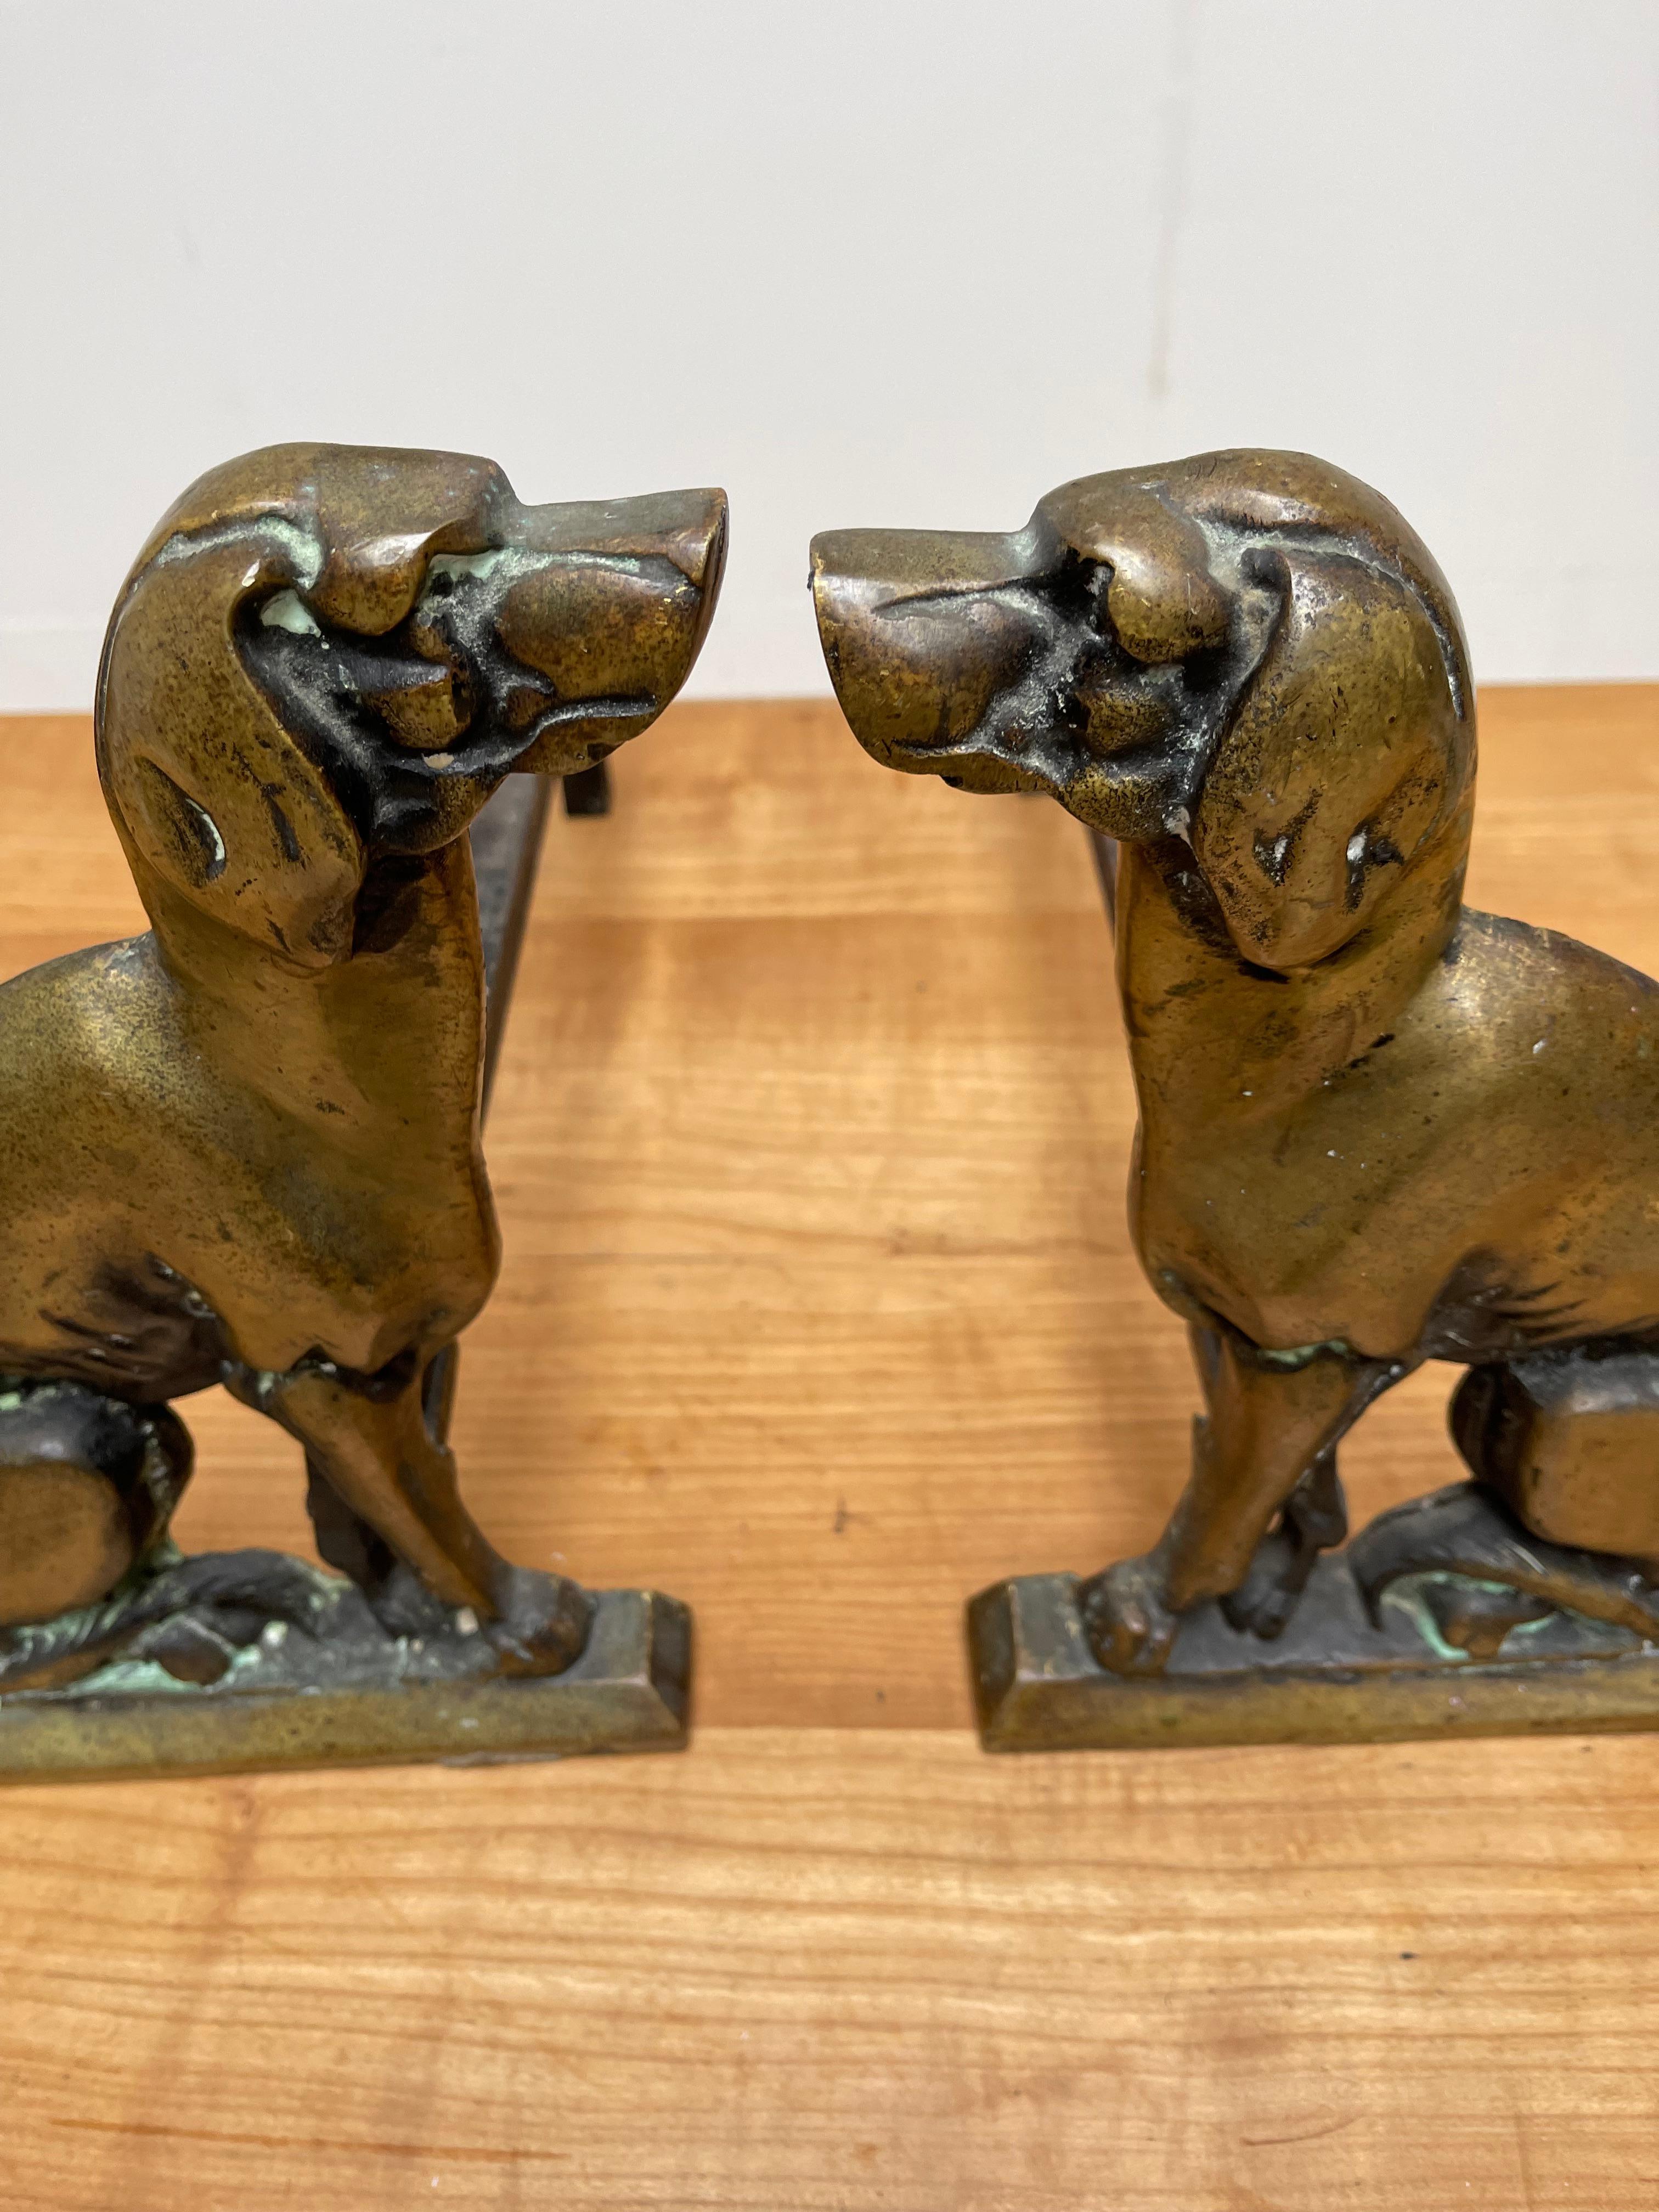 Can you imagine these in your fireplace with the flames all around?

These rare and all hand crafted, sitting dog andirons or chenets are made to stand in your fireplace. We have never before seen these beautiful bronze 'firedogs' (the name could